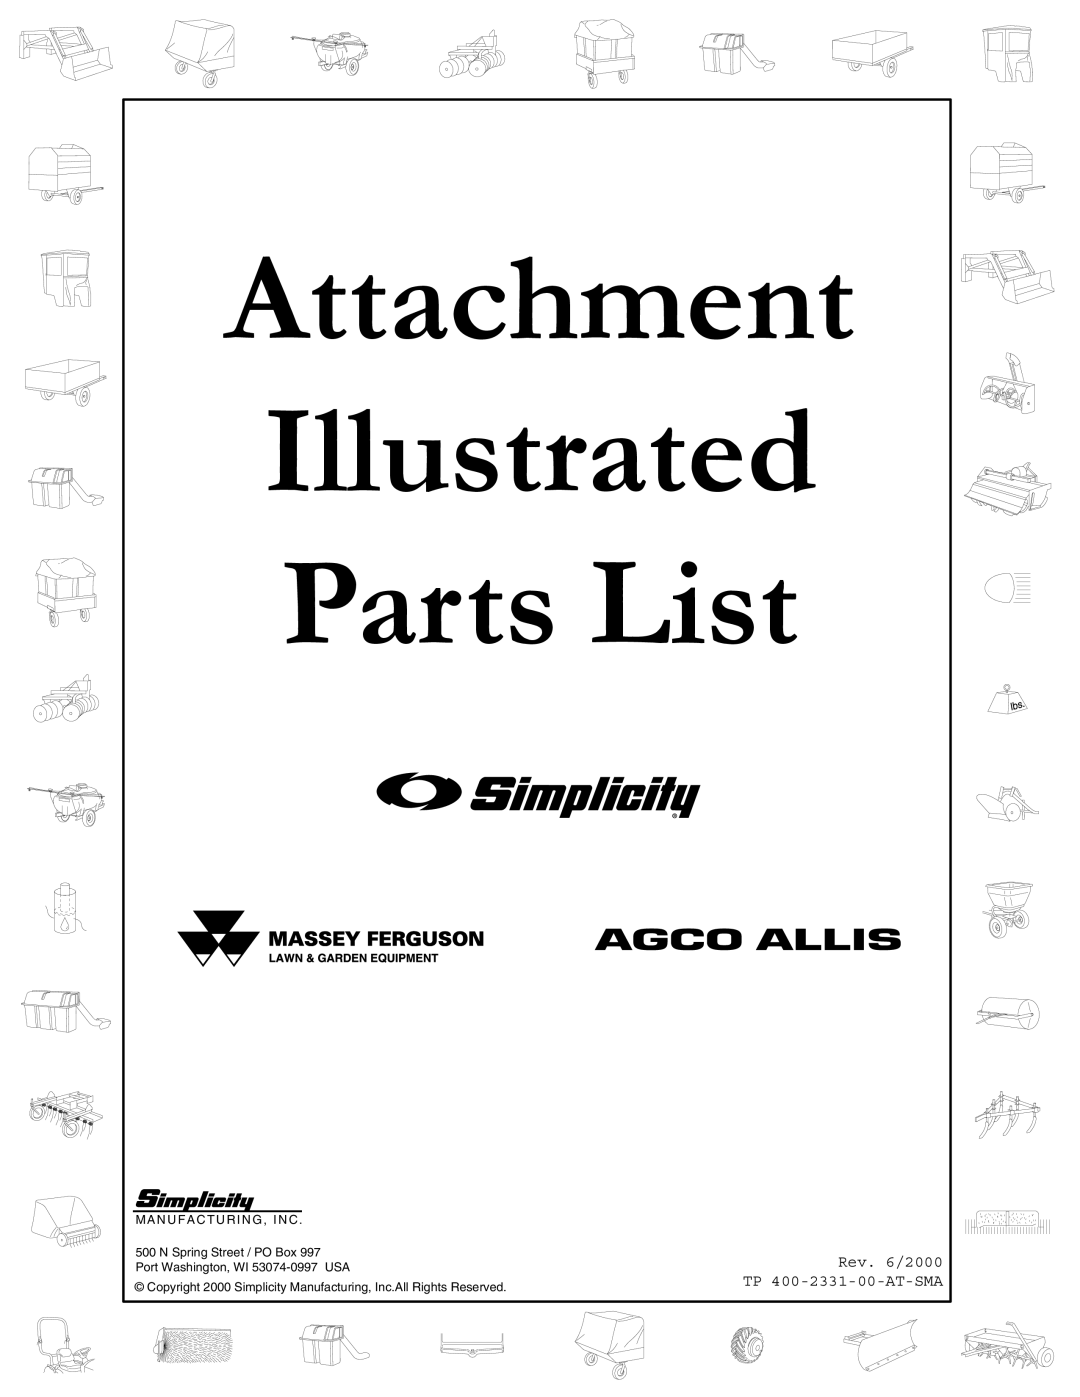 Simplicity 1693706 manual Attachment Illustrated Parts List, Rev. 6/2000 TP 400-2331-00-AT-SMA 